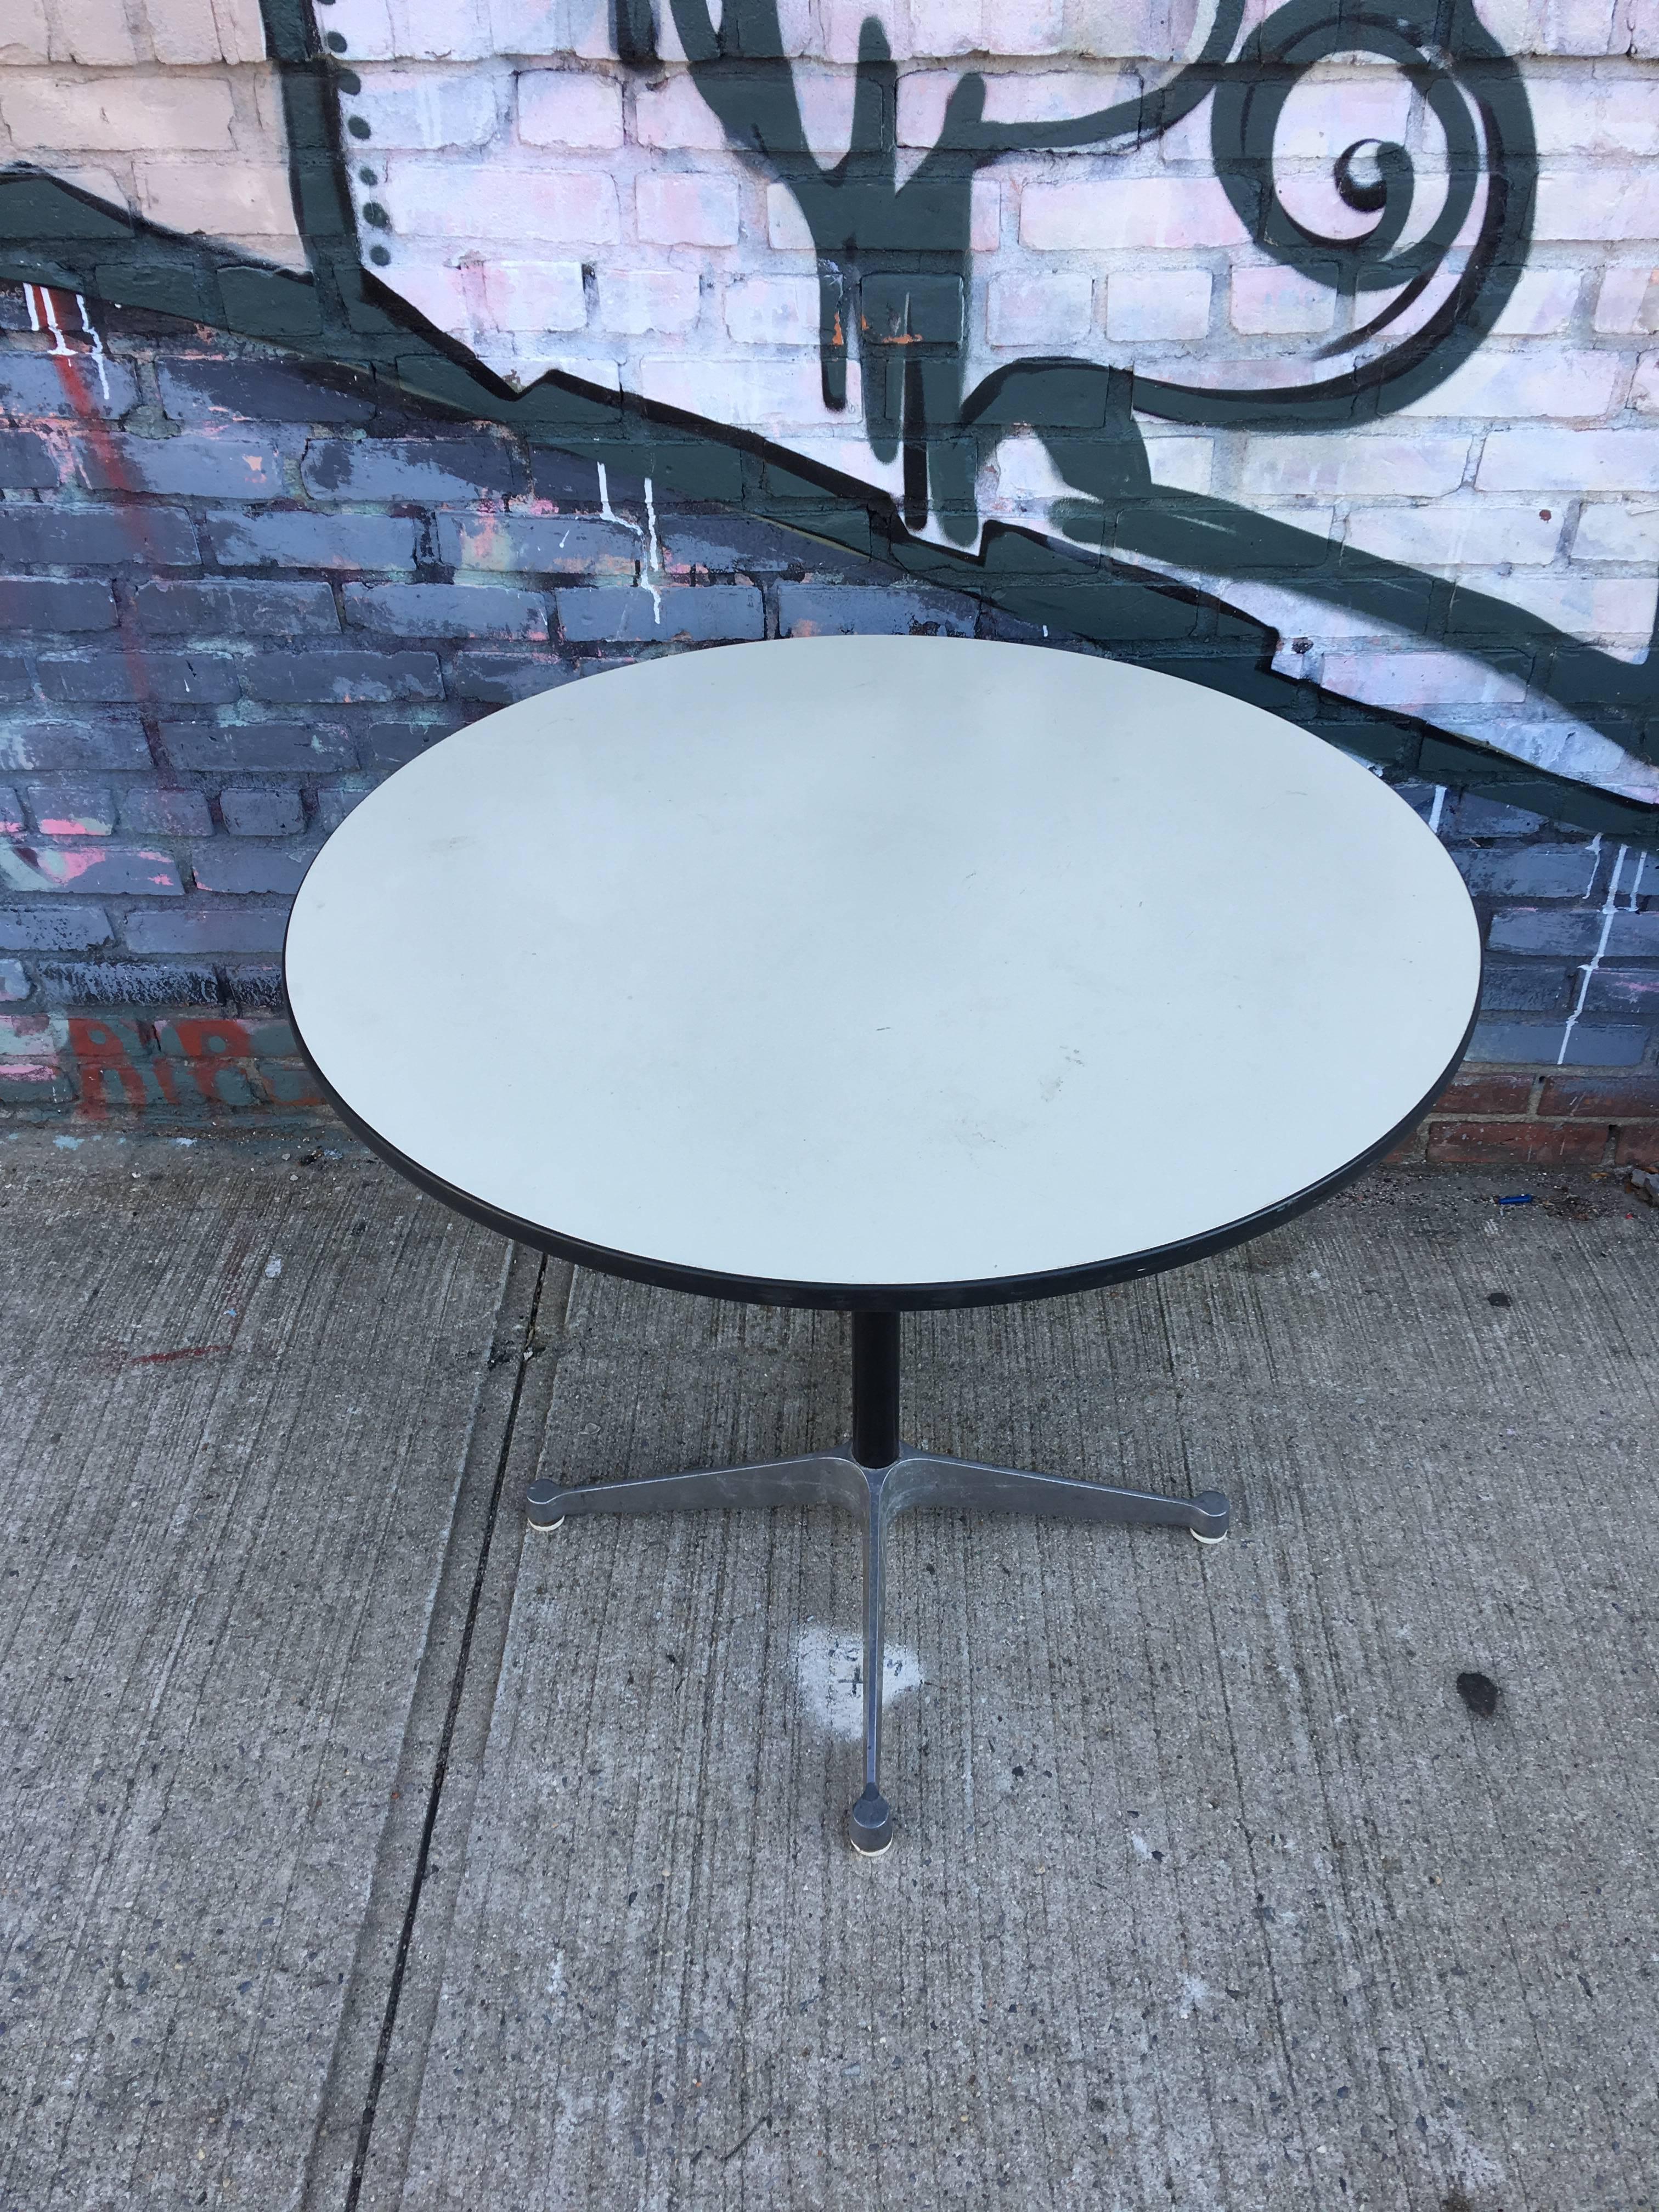 Herman Miller Eames 36 inch dining table. White laminate top. Aluminium base with tag on pedestal. Signed Herman Miller underneath. Easily fits two-four chairs.